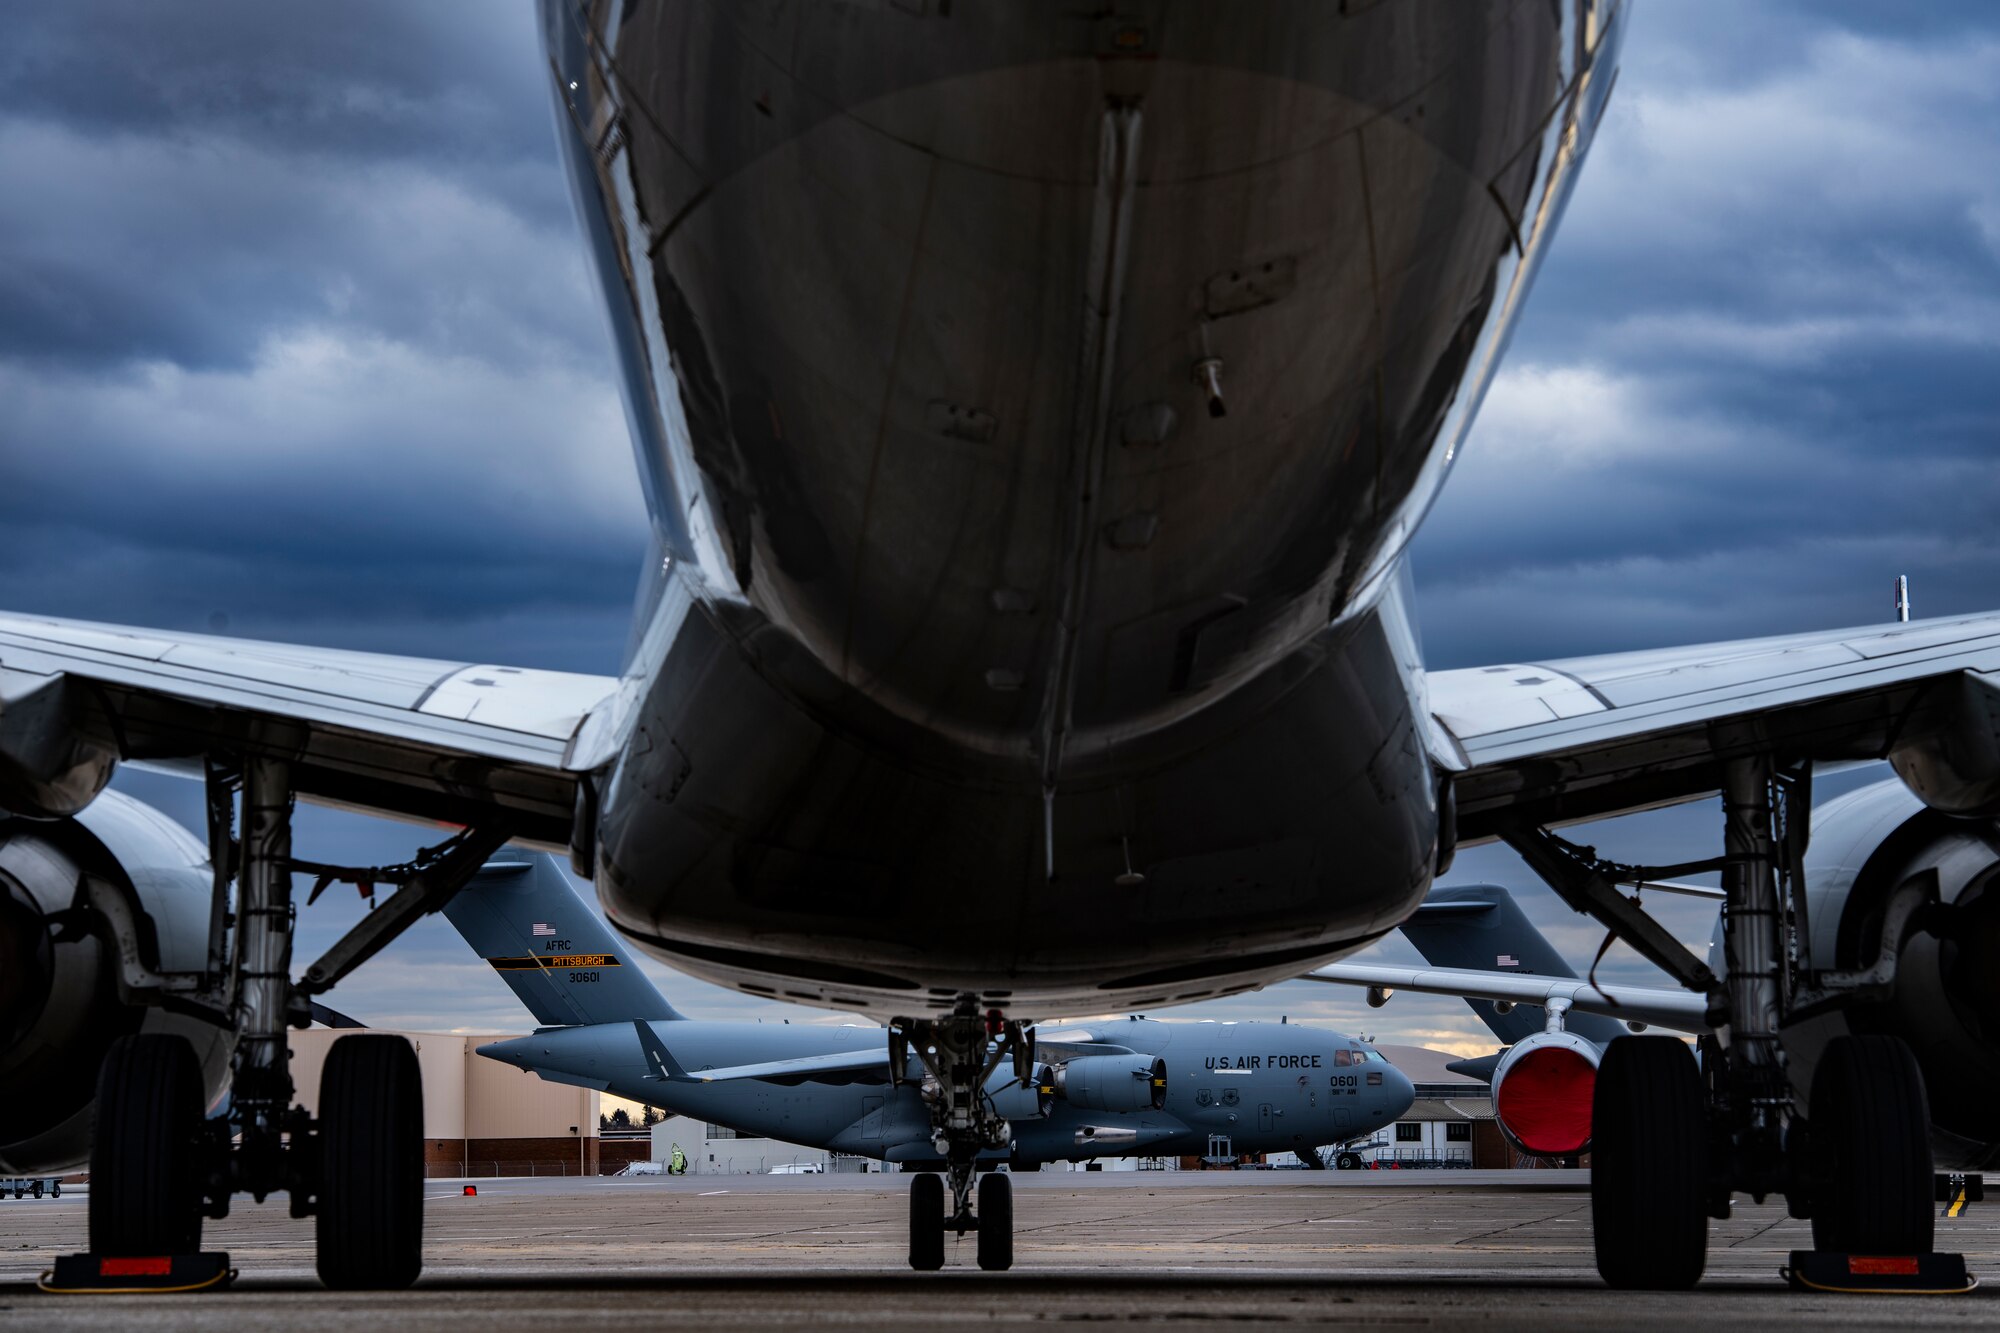 A C-17 Globemaster III assigned to the 911th Airlift Wing receives routine preflight maintenance on the flightline behind grounded commercial aircraft at the Pittsburgh International Airport Air Reserve Station, Pennsylvania, March 30, 2020.